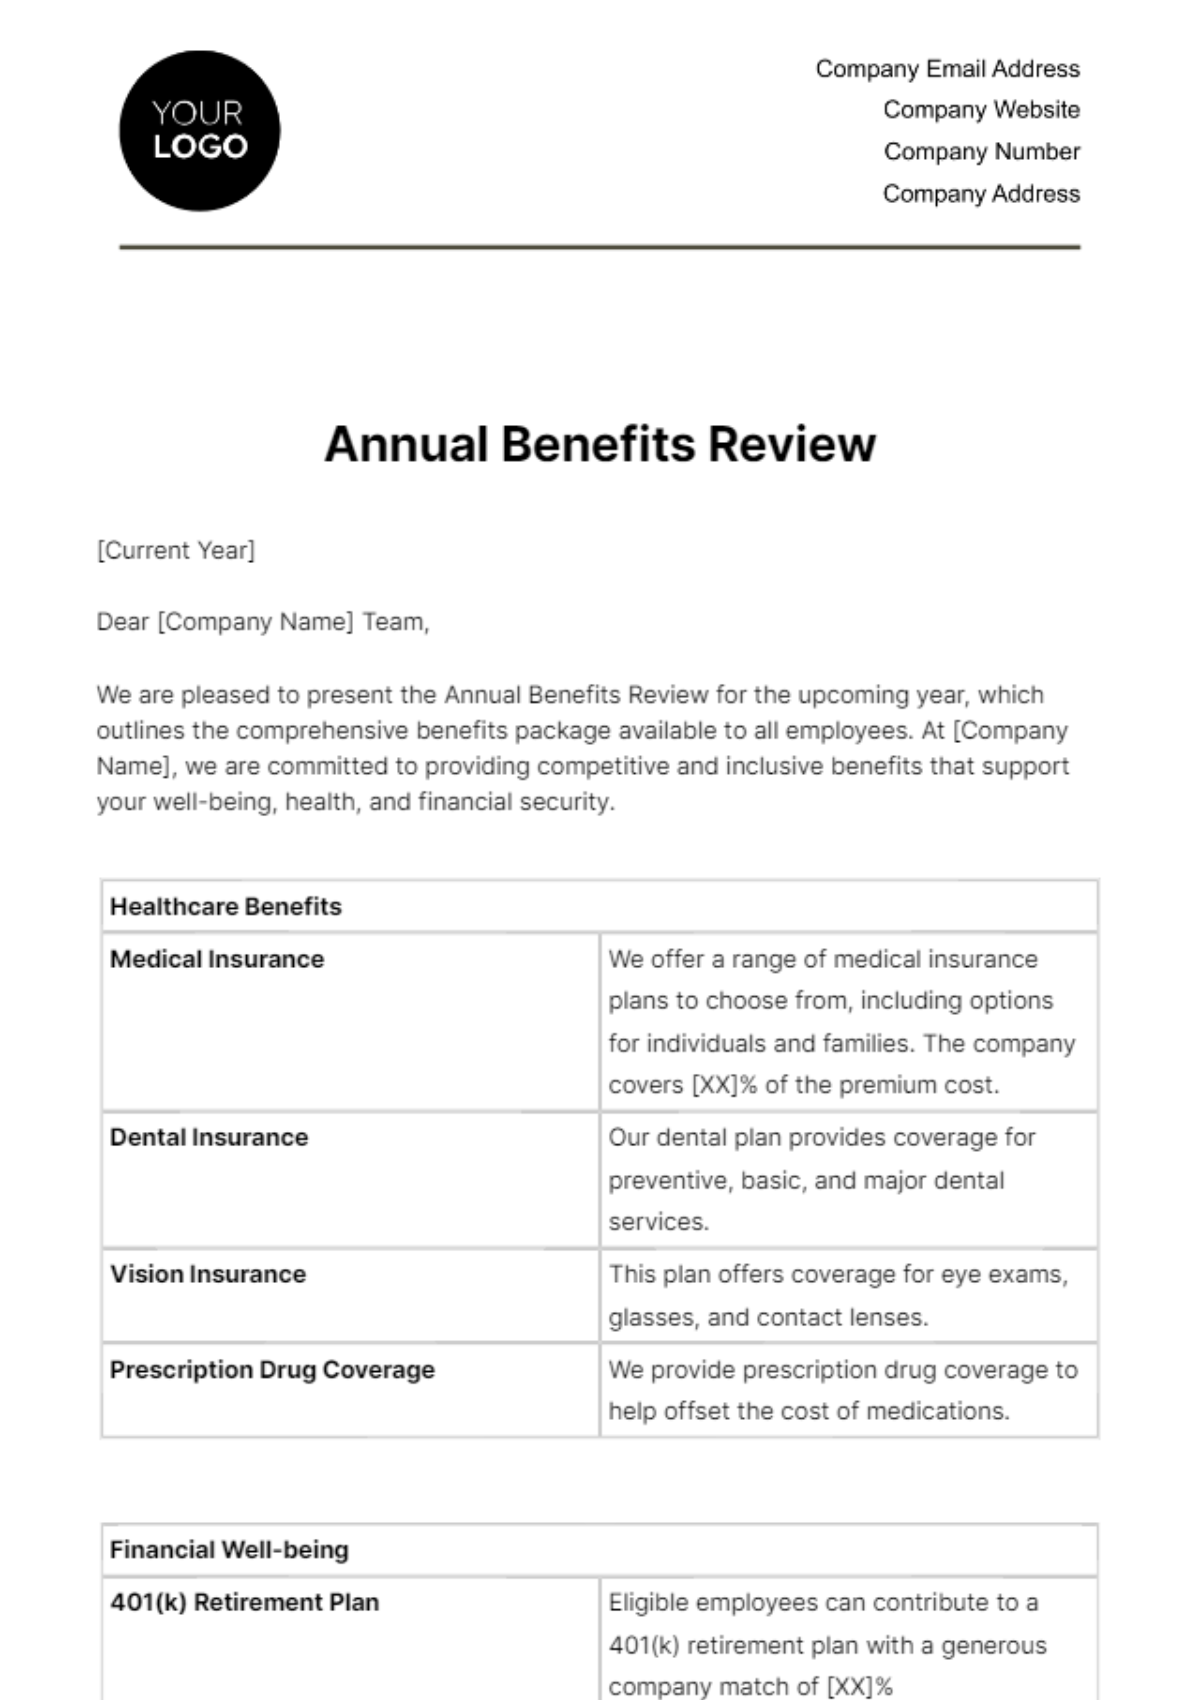 Free Annual Benefits Review HR Template